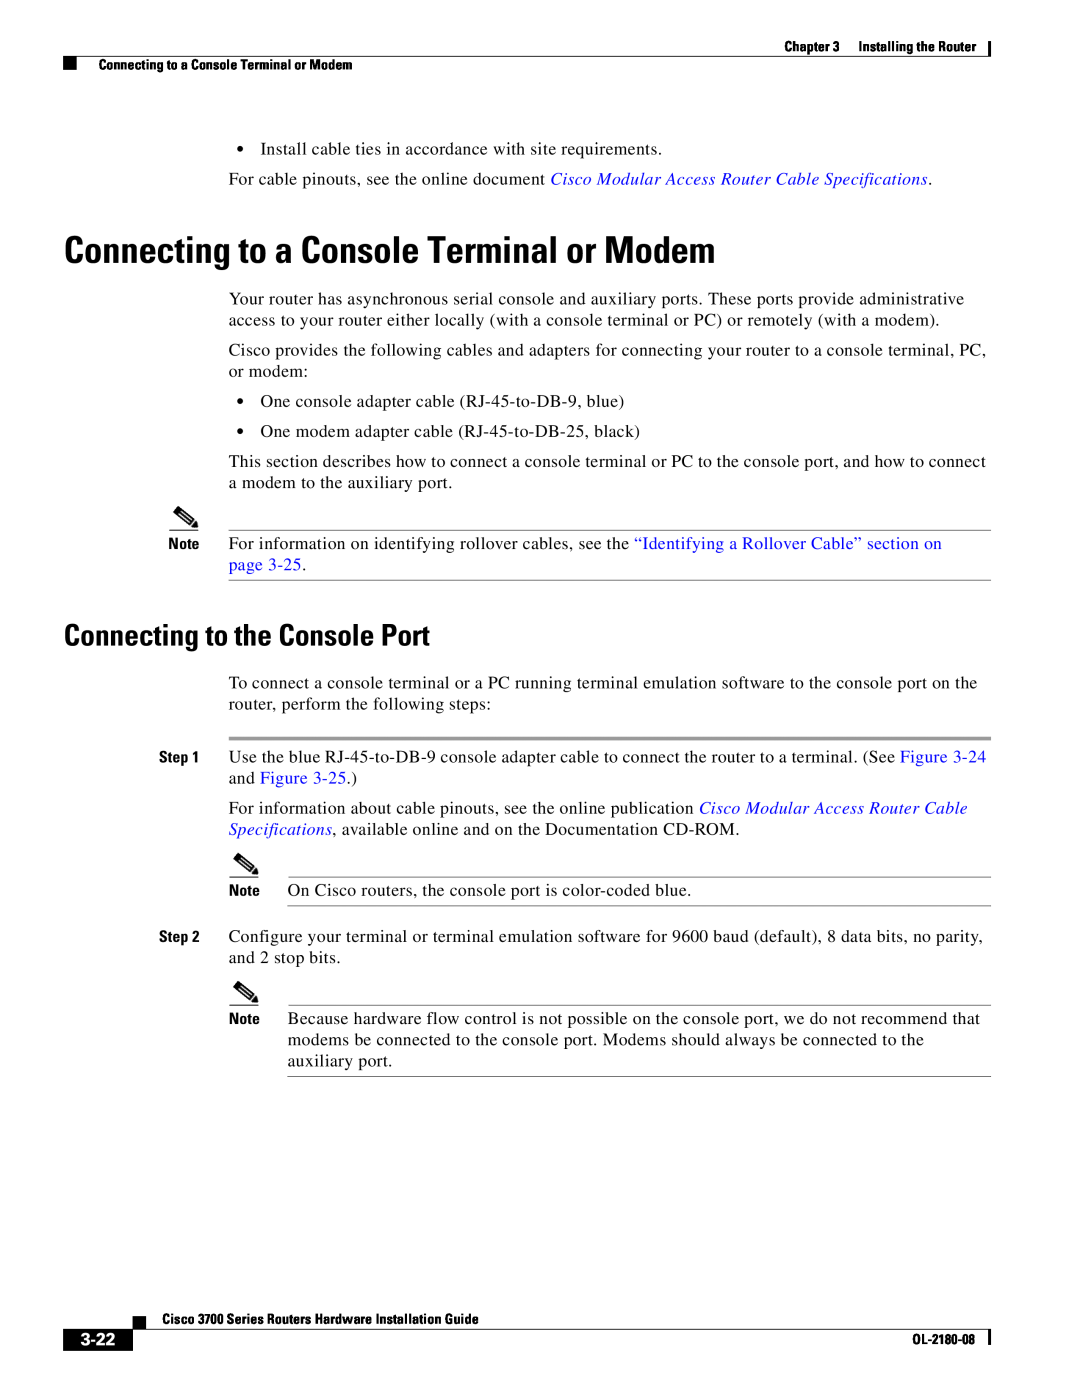 Cisco Systems 3700 Series manual Connecting to a Console Terminal or Modem, Connecting to the Console Port, 3-22 